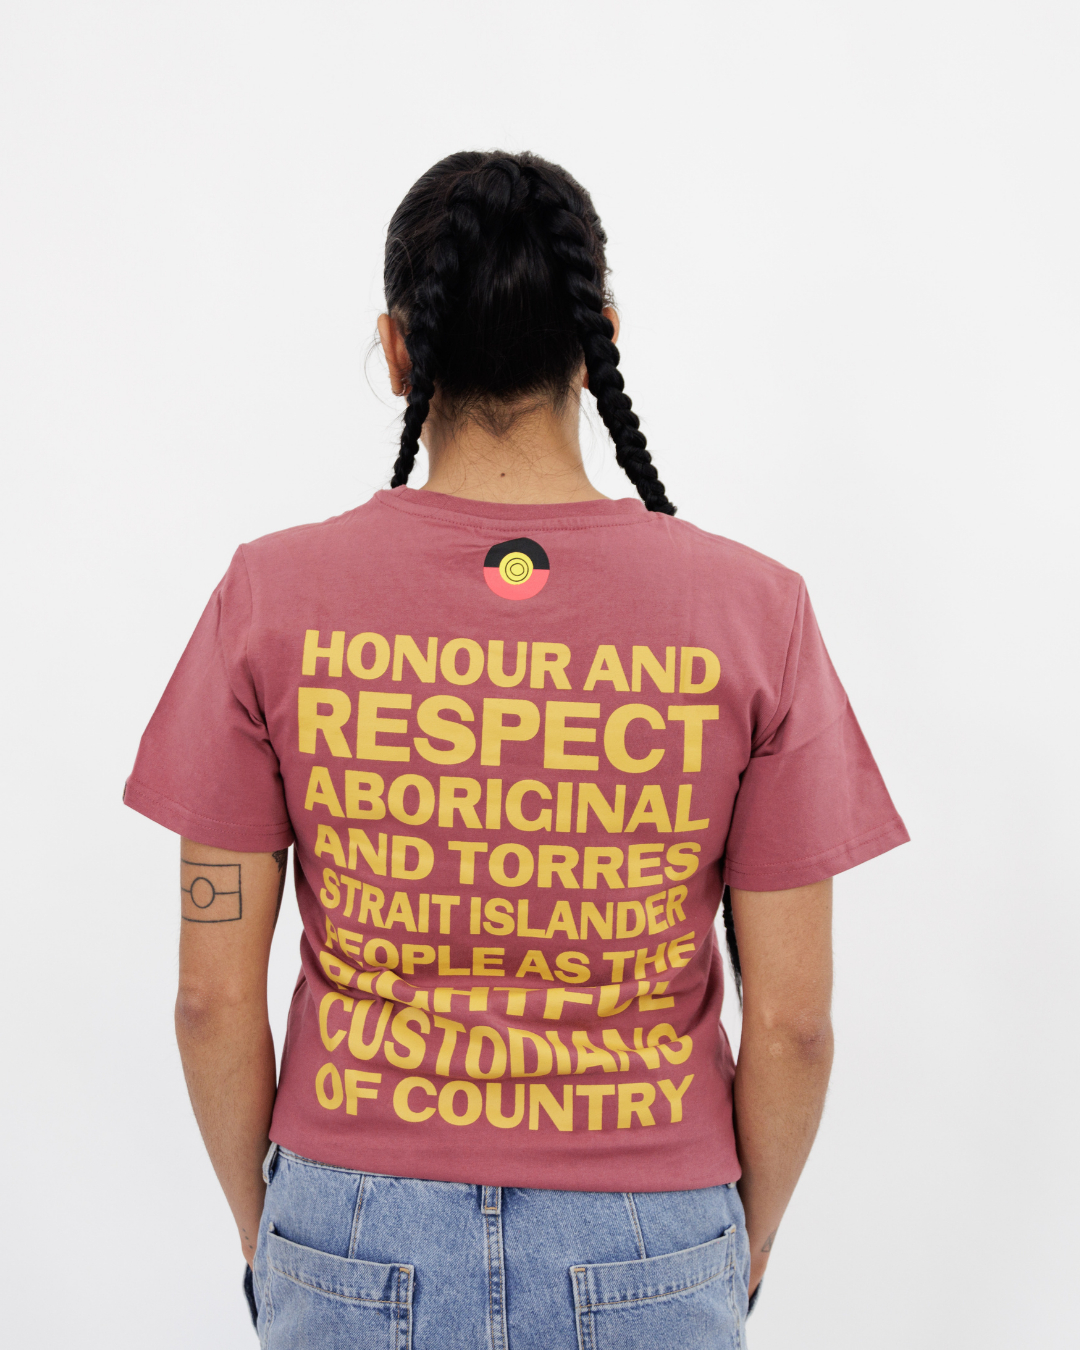 Clothing The Gaps. Kids Plum Honour Country Tee. Plum pinky purple t-shirt with screen printed mustard yellow bold capital text 'Honour and respect Aboriginal and Torres Strait Islander people as the rightful custodians of country.' The word 'Honour country' on the front in the same text and contrasting colour.